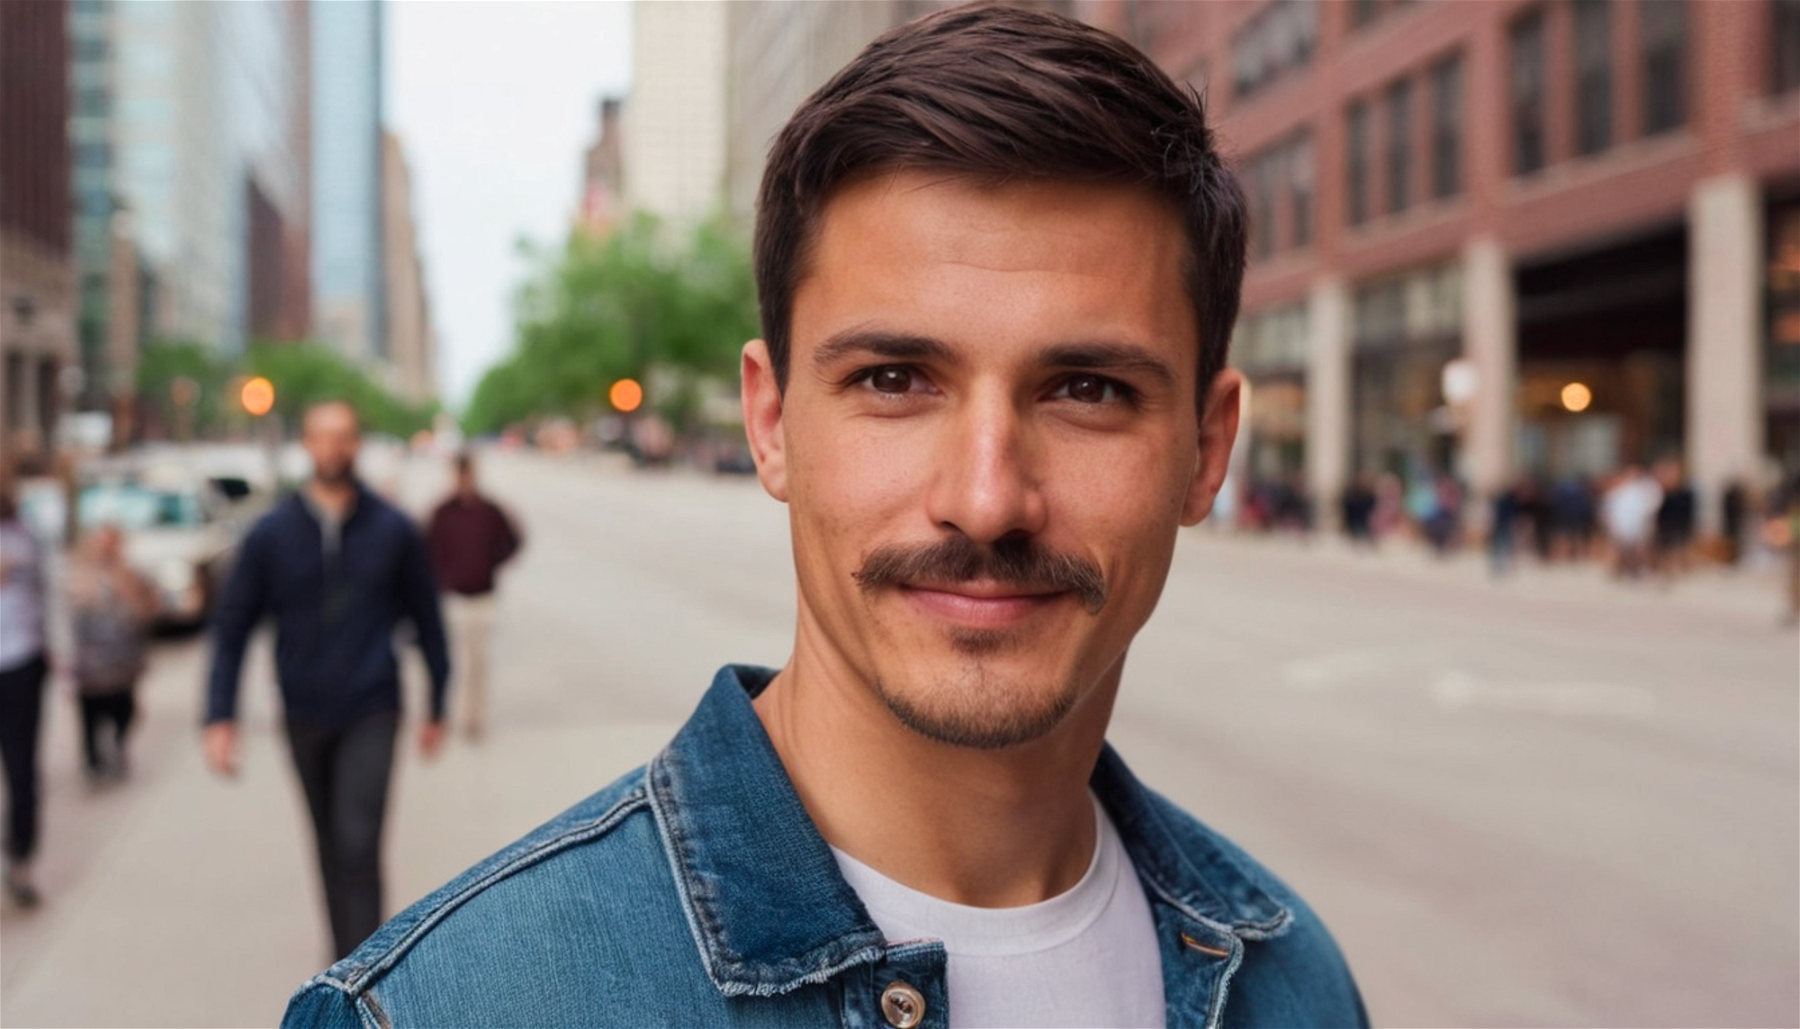 A (smilling) man wearing a blue jeans jacket, (large smile), Busy street in Chicago, short hair and mustache